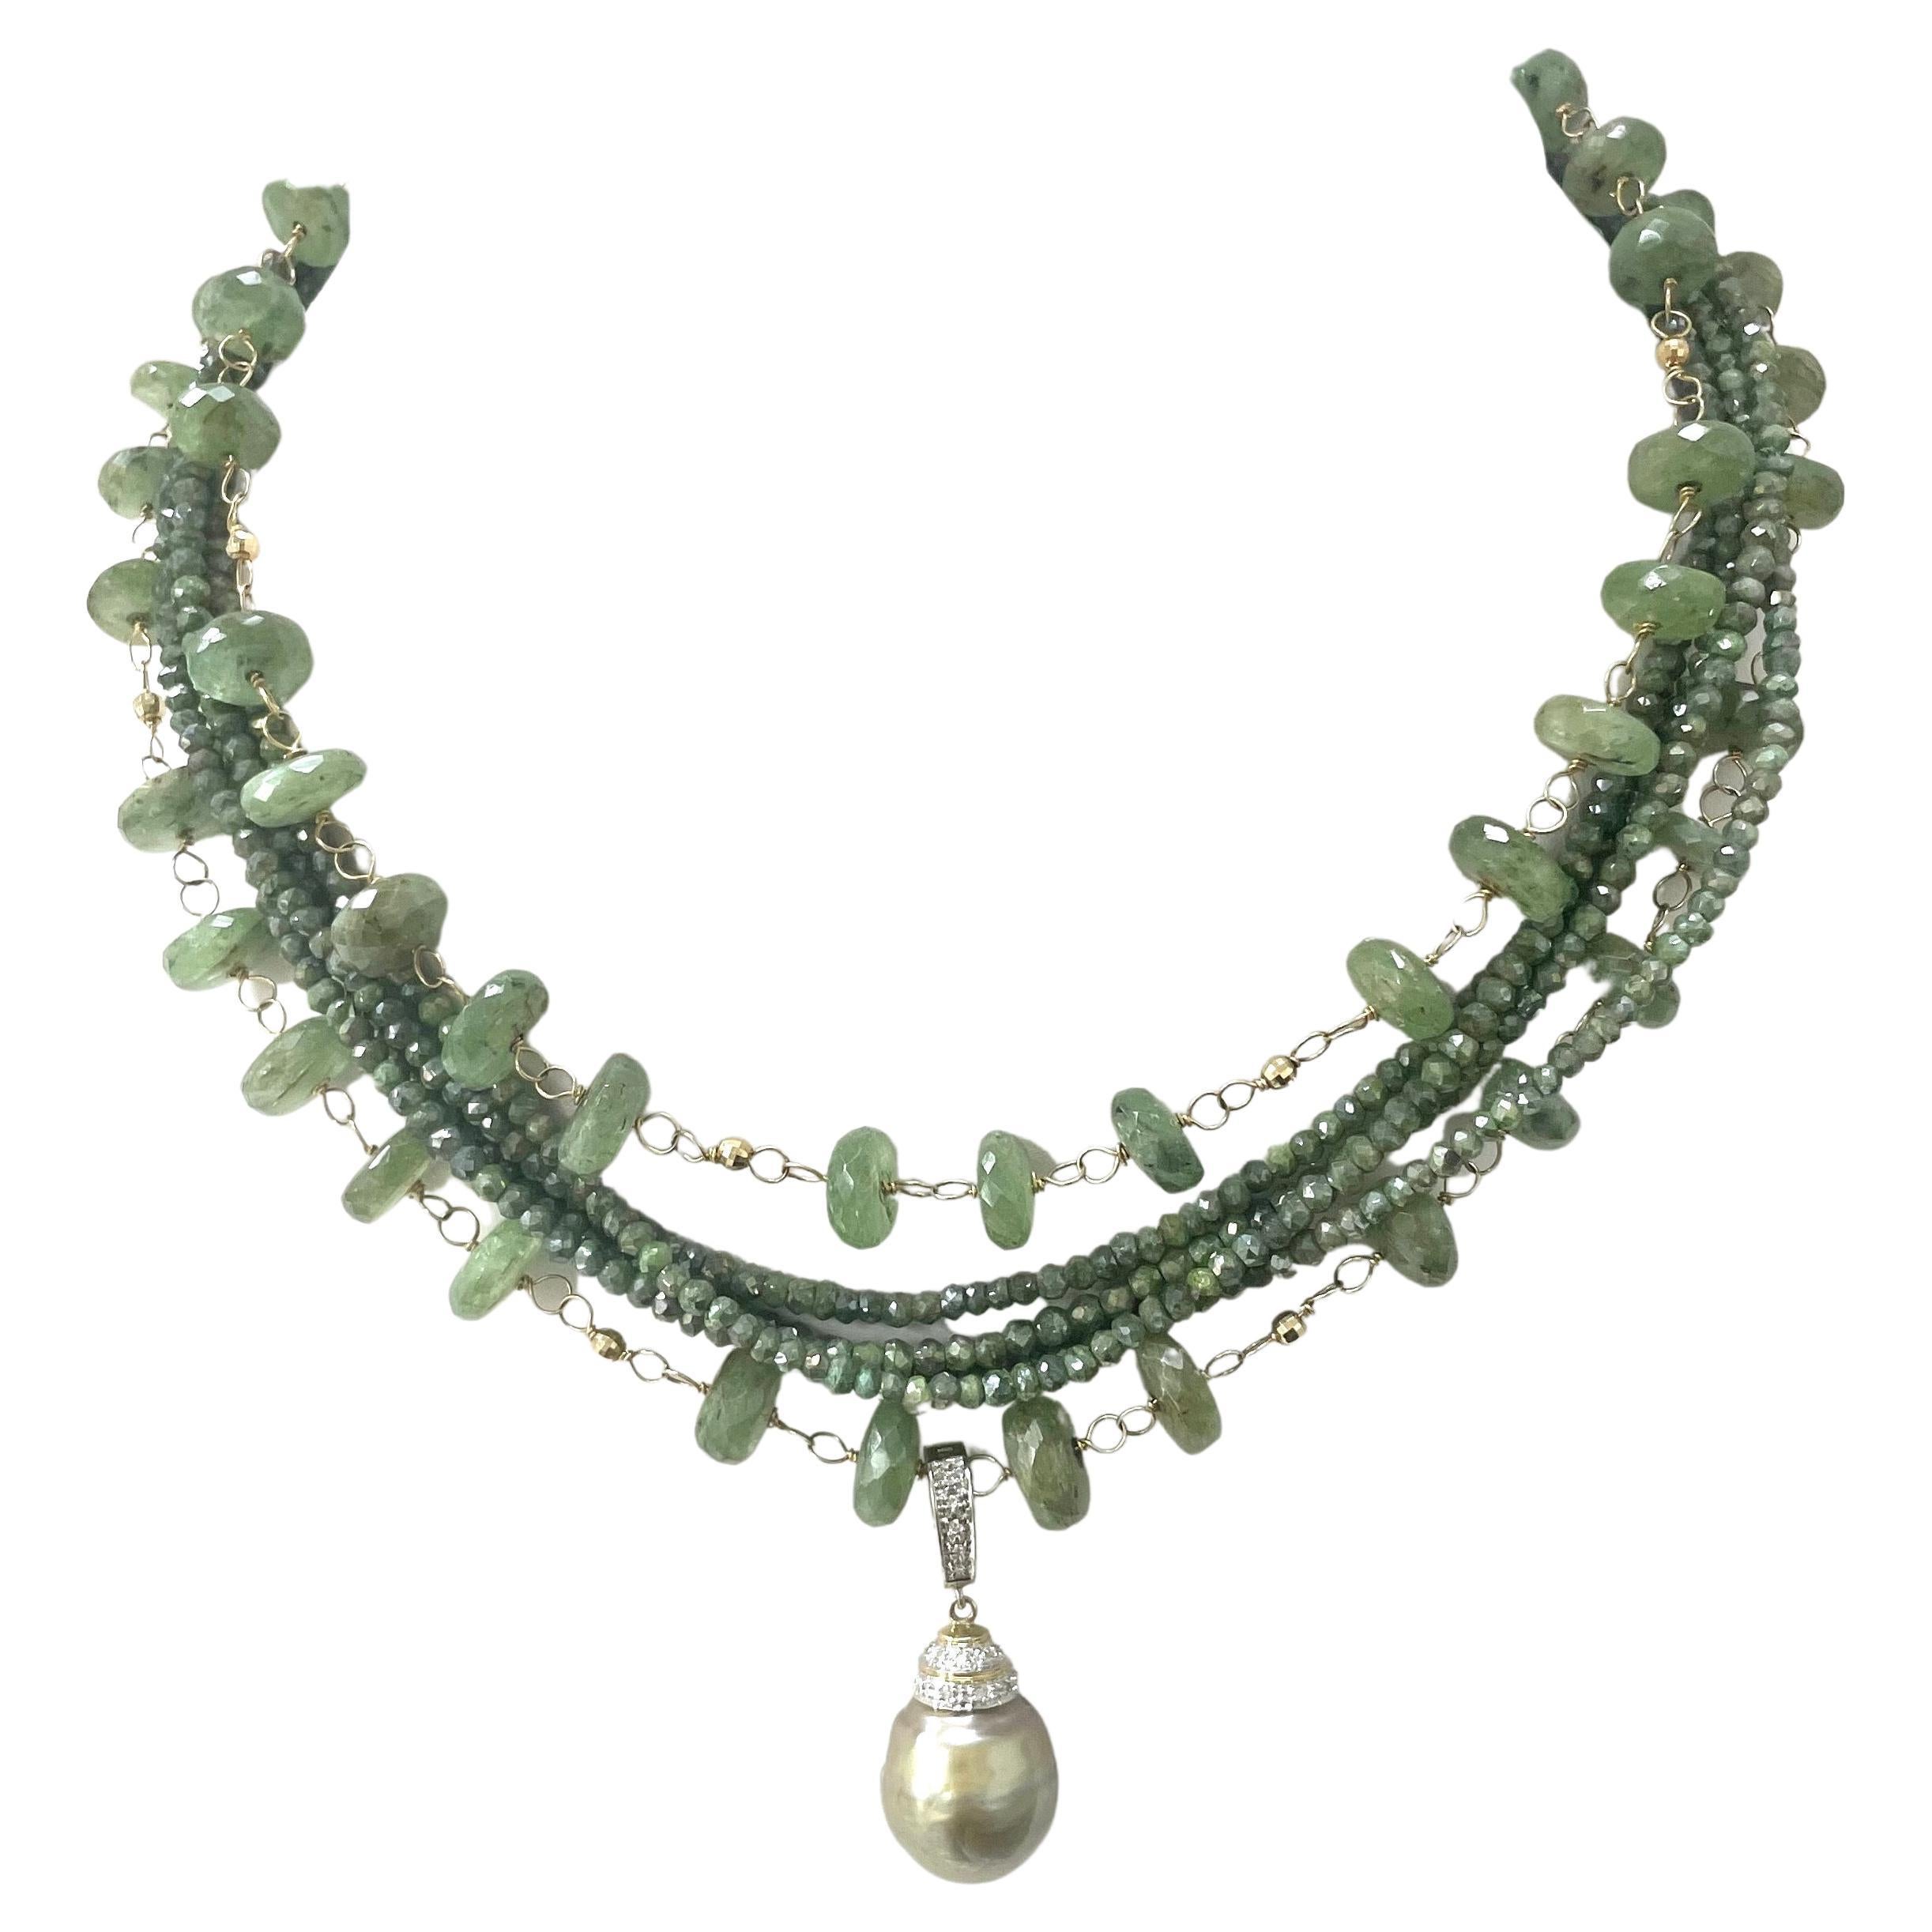 Green Kyanite and Silverite Multistrand Paradizia Necklace with Tahitian Pendant For Sale 3